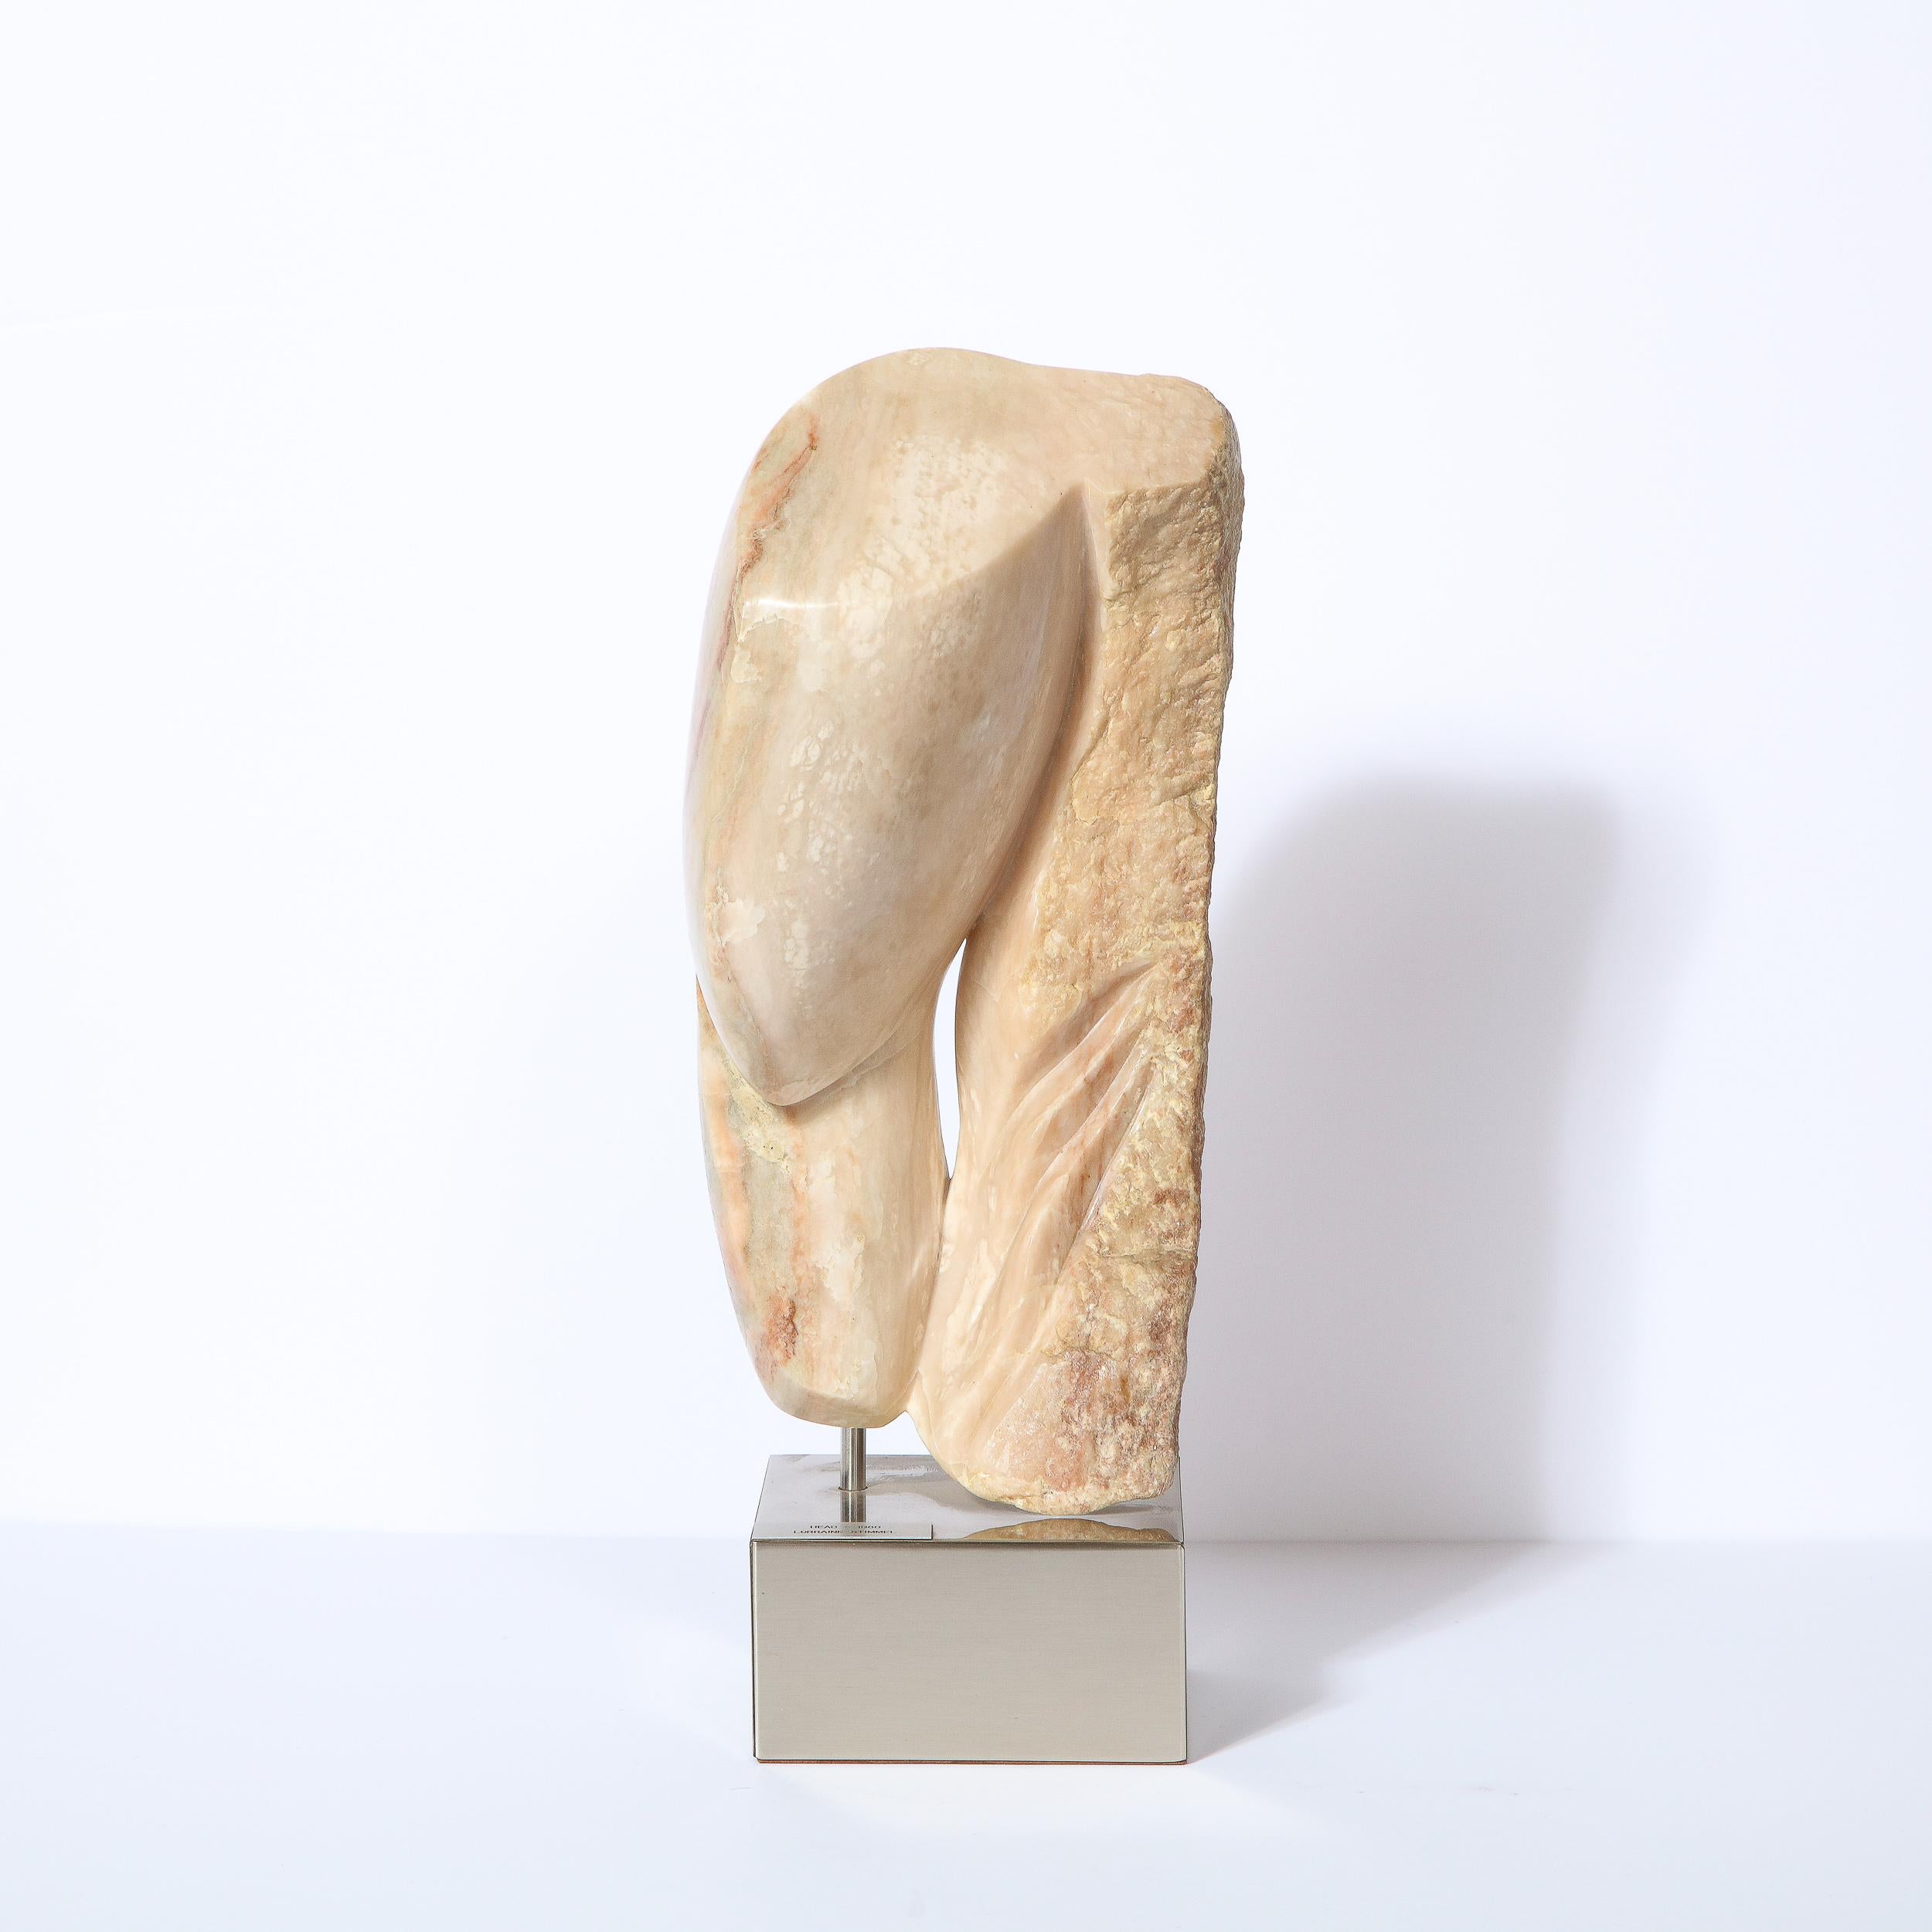 This refined modernist sculpture, entitled 